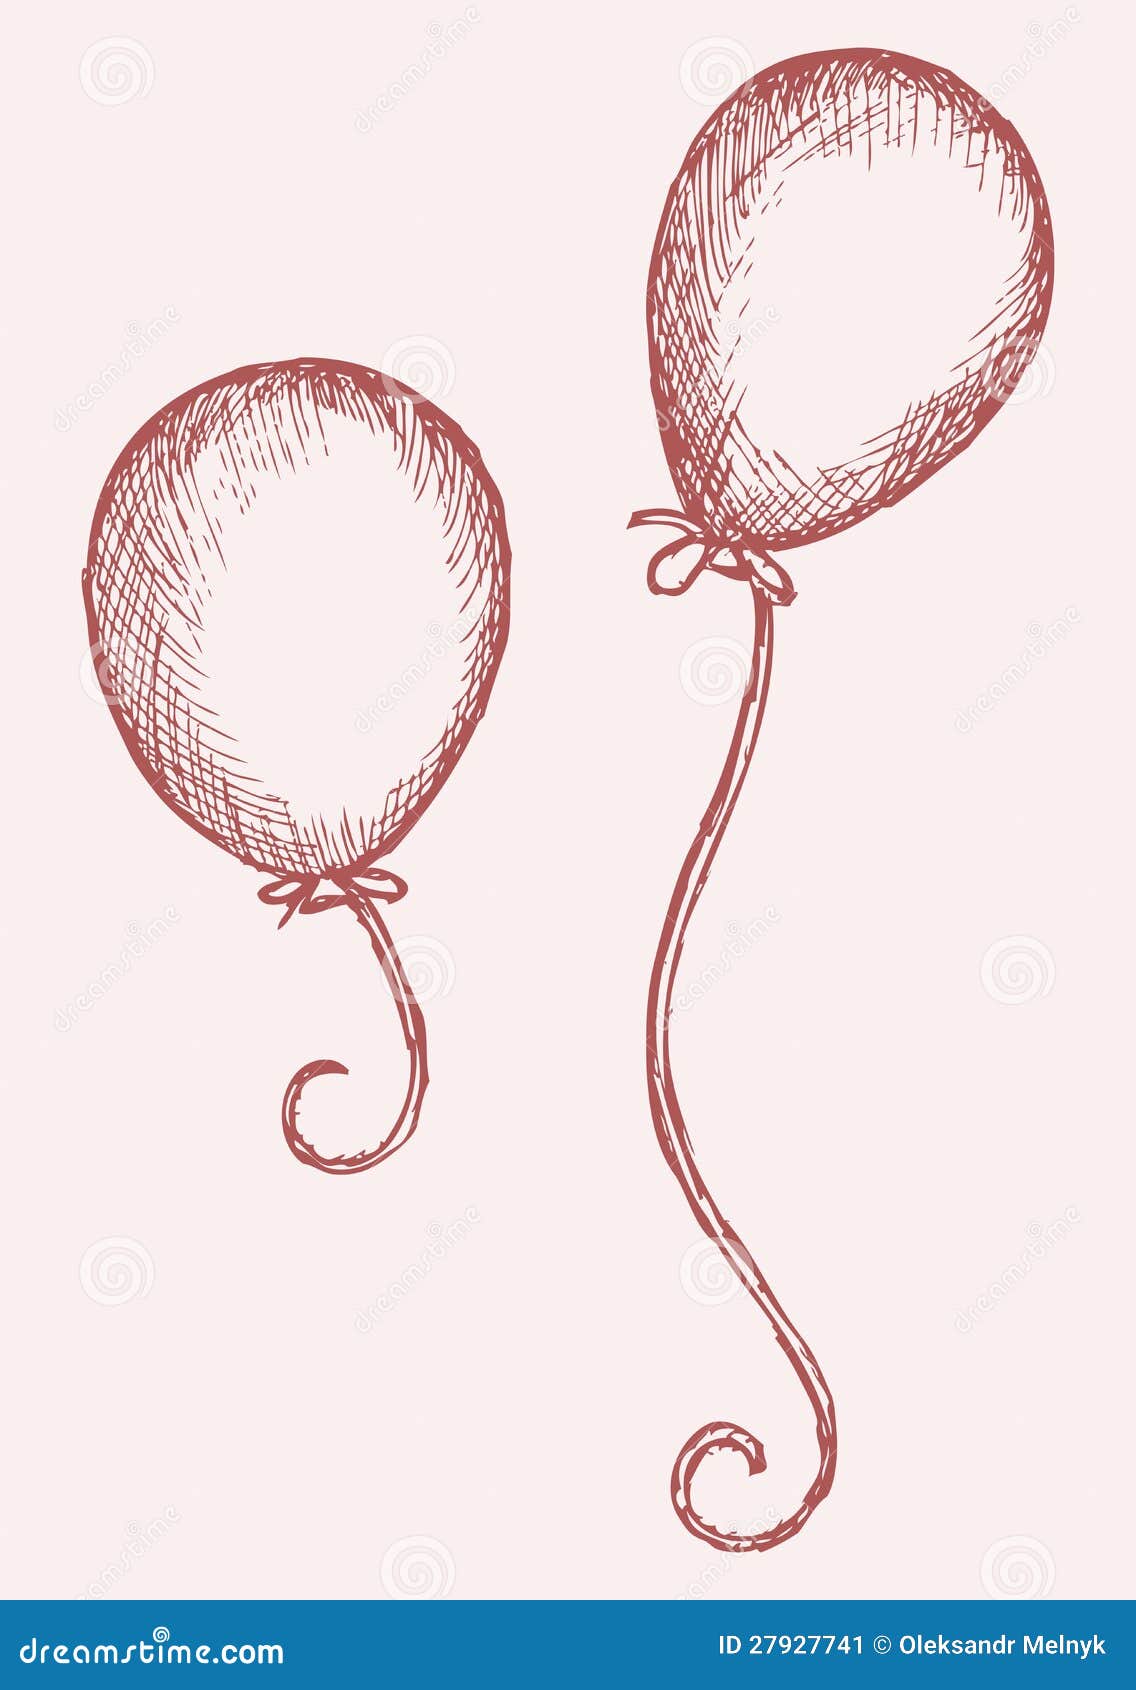 100000 Balloon line drawing Vector Images  Depositphotos